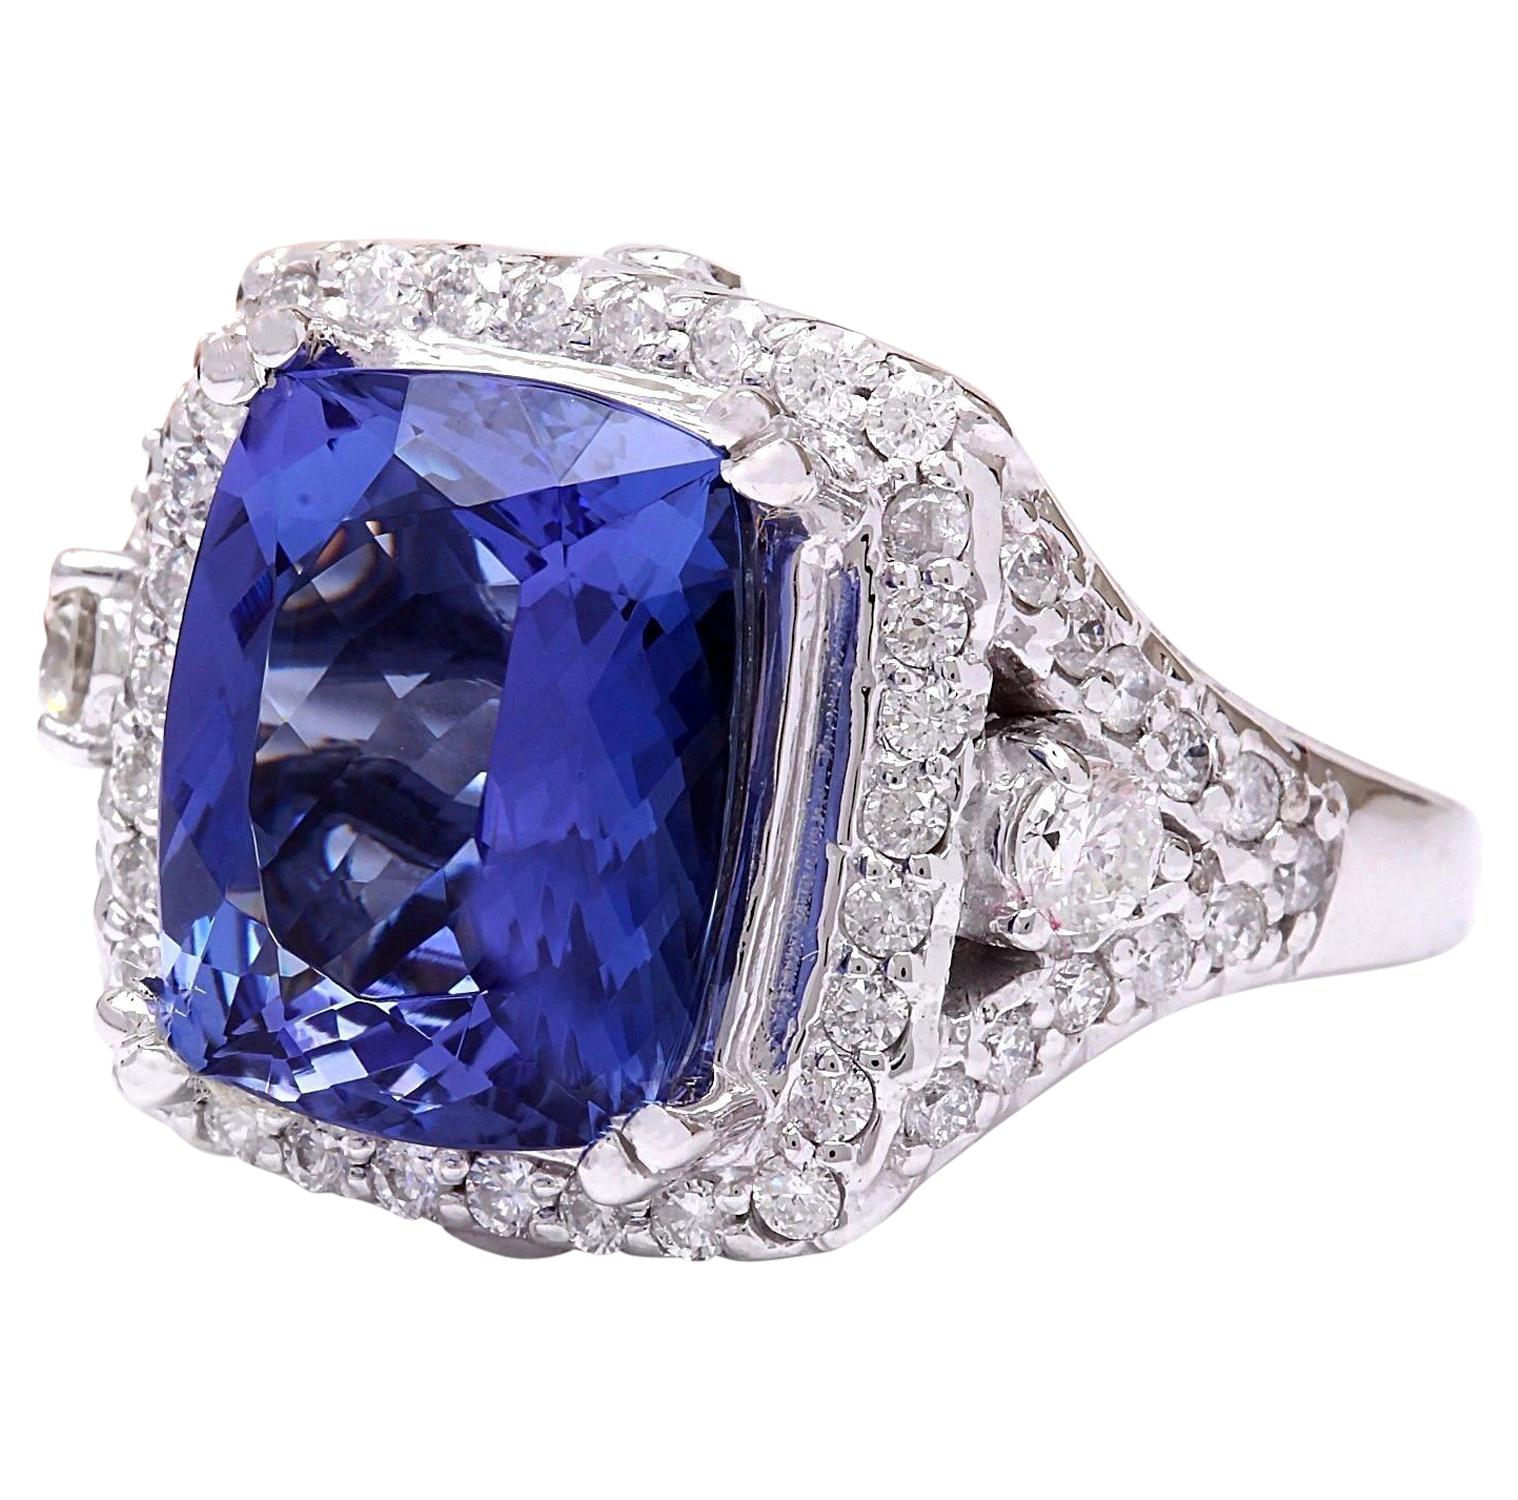 Introducing our stunning 7.80 Carat Tanzanite 14K Solid White Gold Diamond Ring. Crafted from luxurious 14K White Gold, this ring features a captivating cushion-cut Tanzanite weighing 6.80 carats, with dimensions of 12.00x10.00 mm, showcasing its